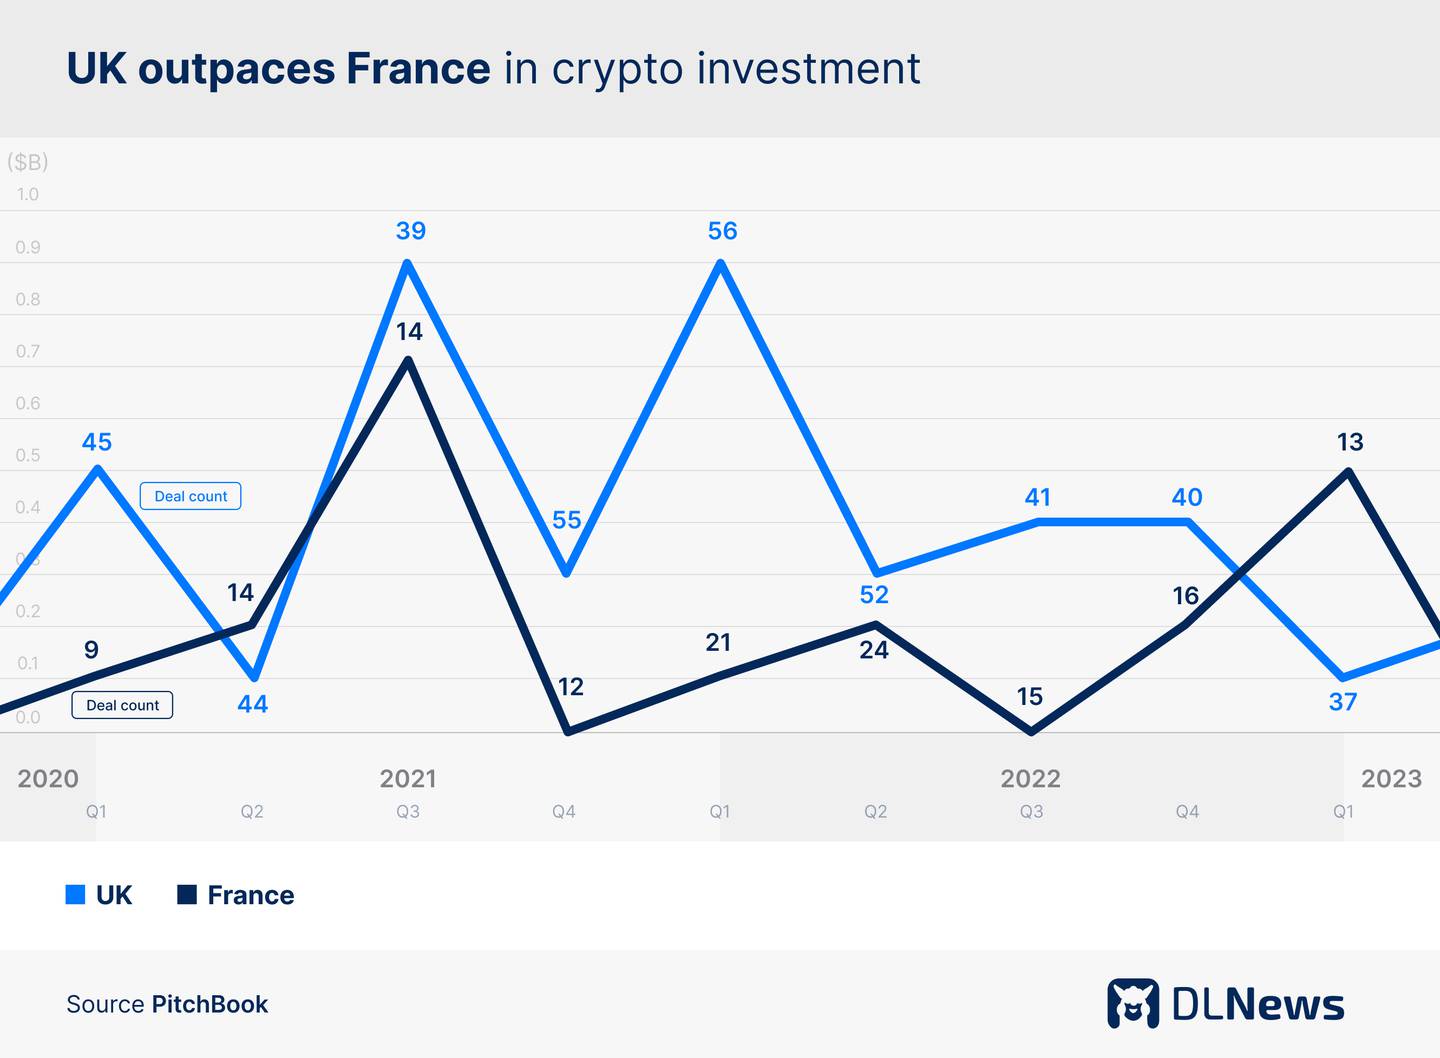 UK outpaces France in crypto investment.